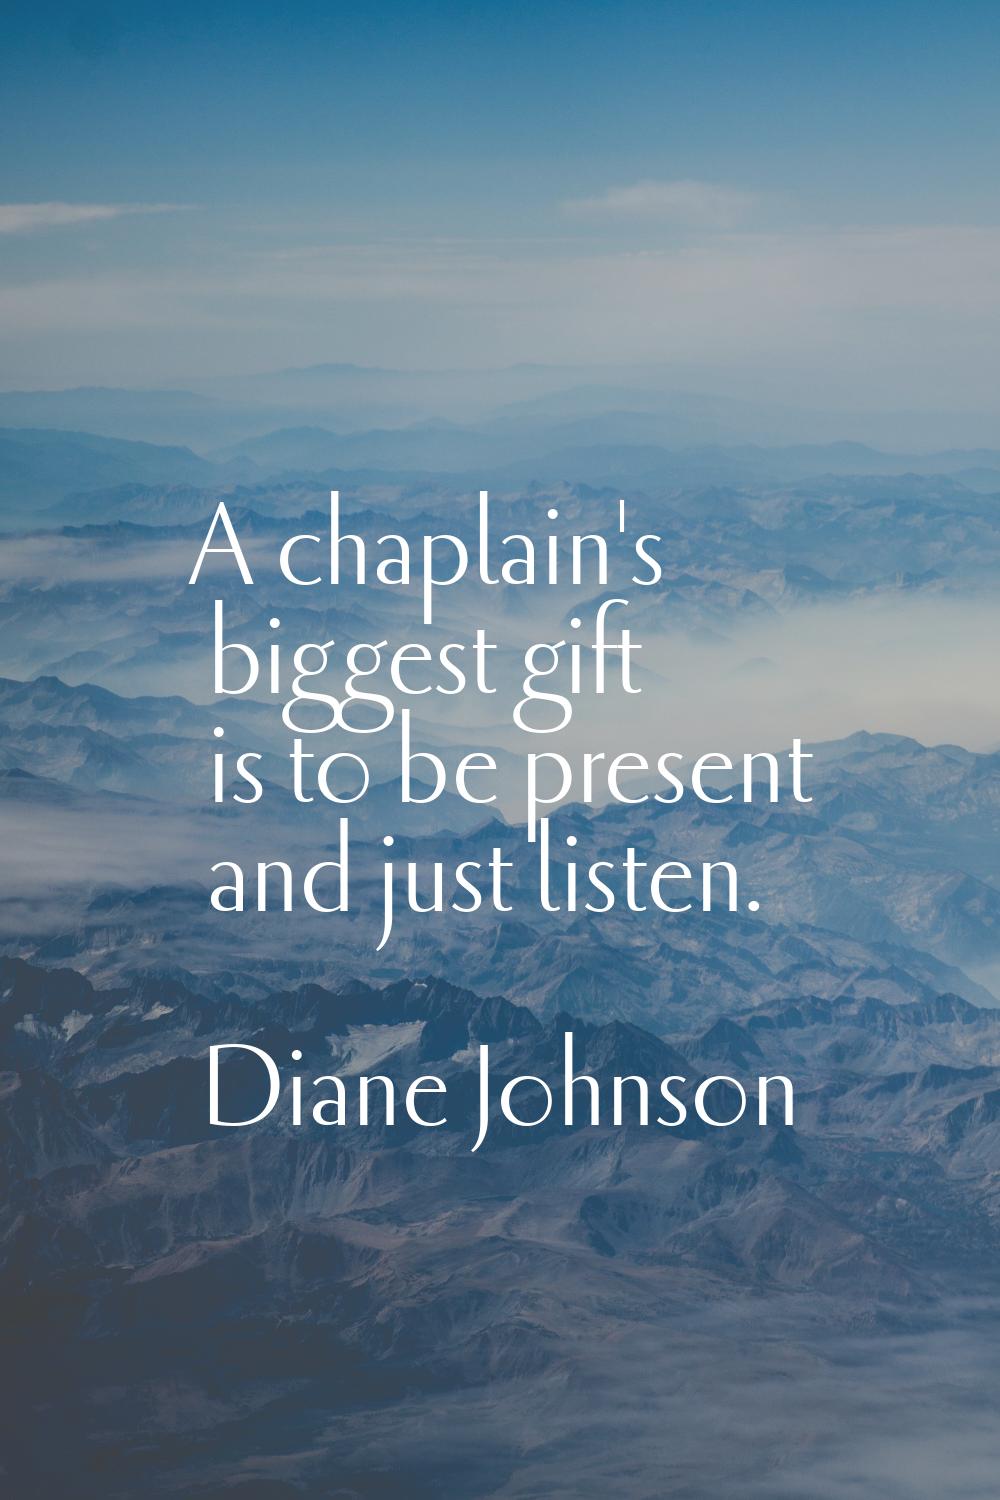 A chaplain's biggest gift is to be present and just listen.